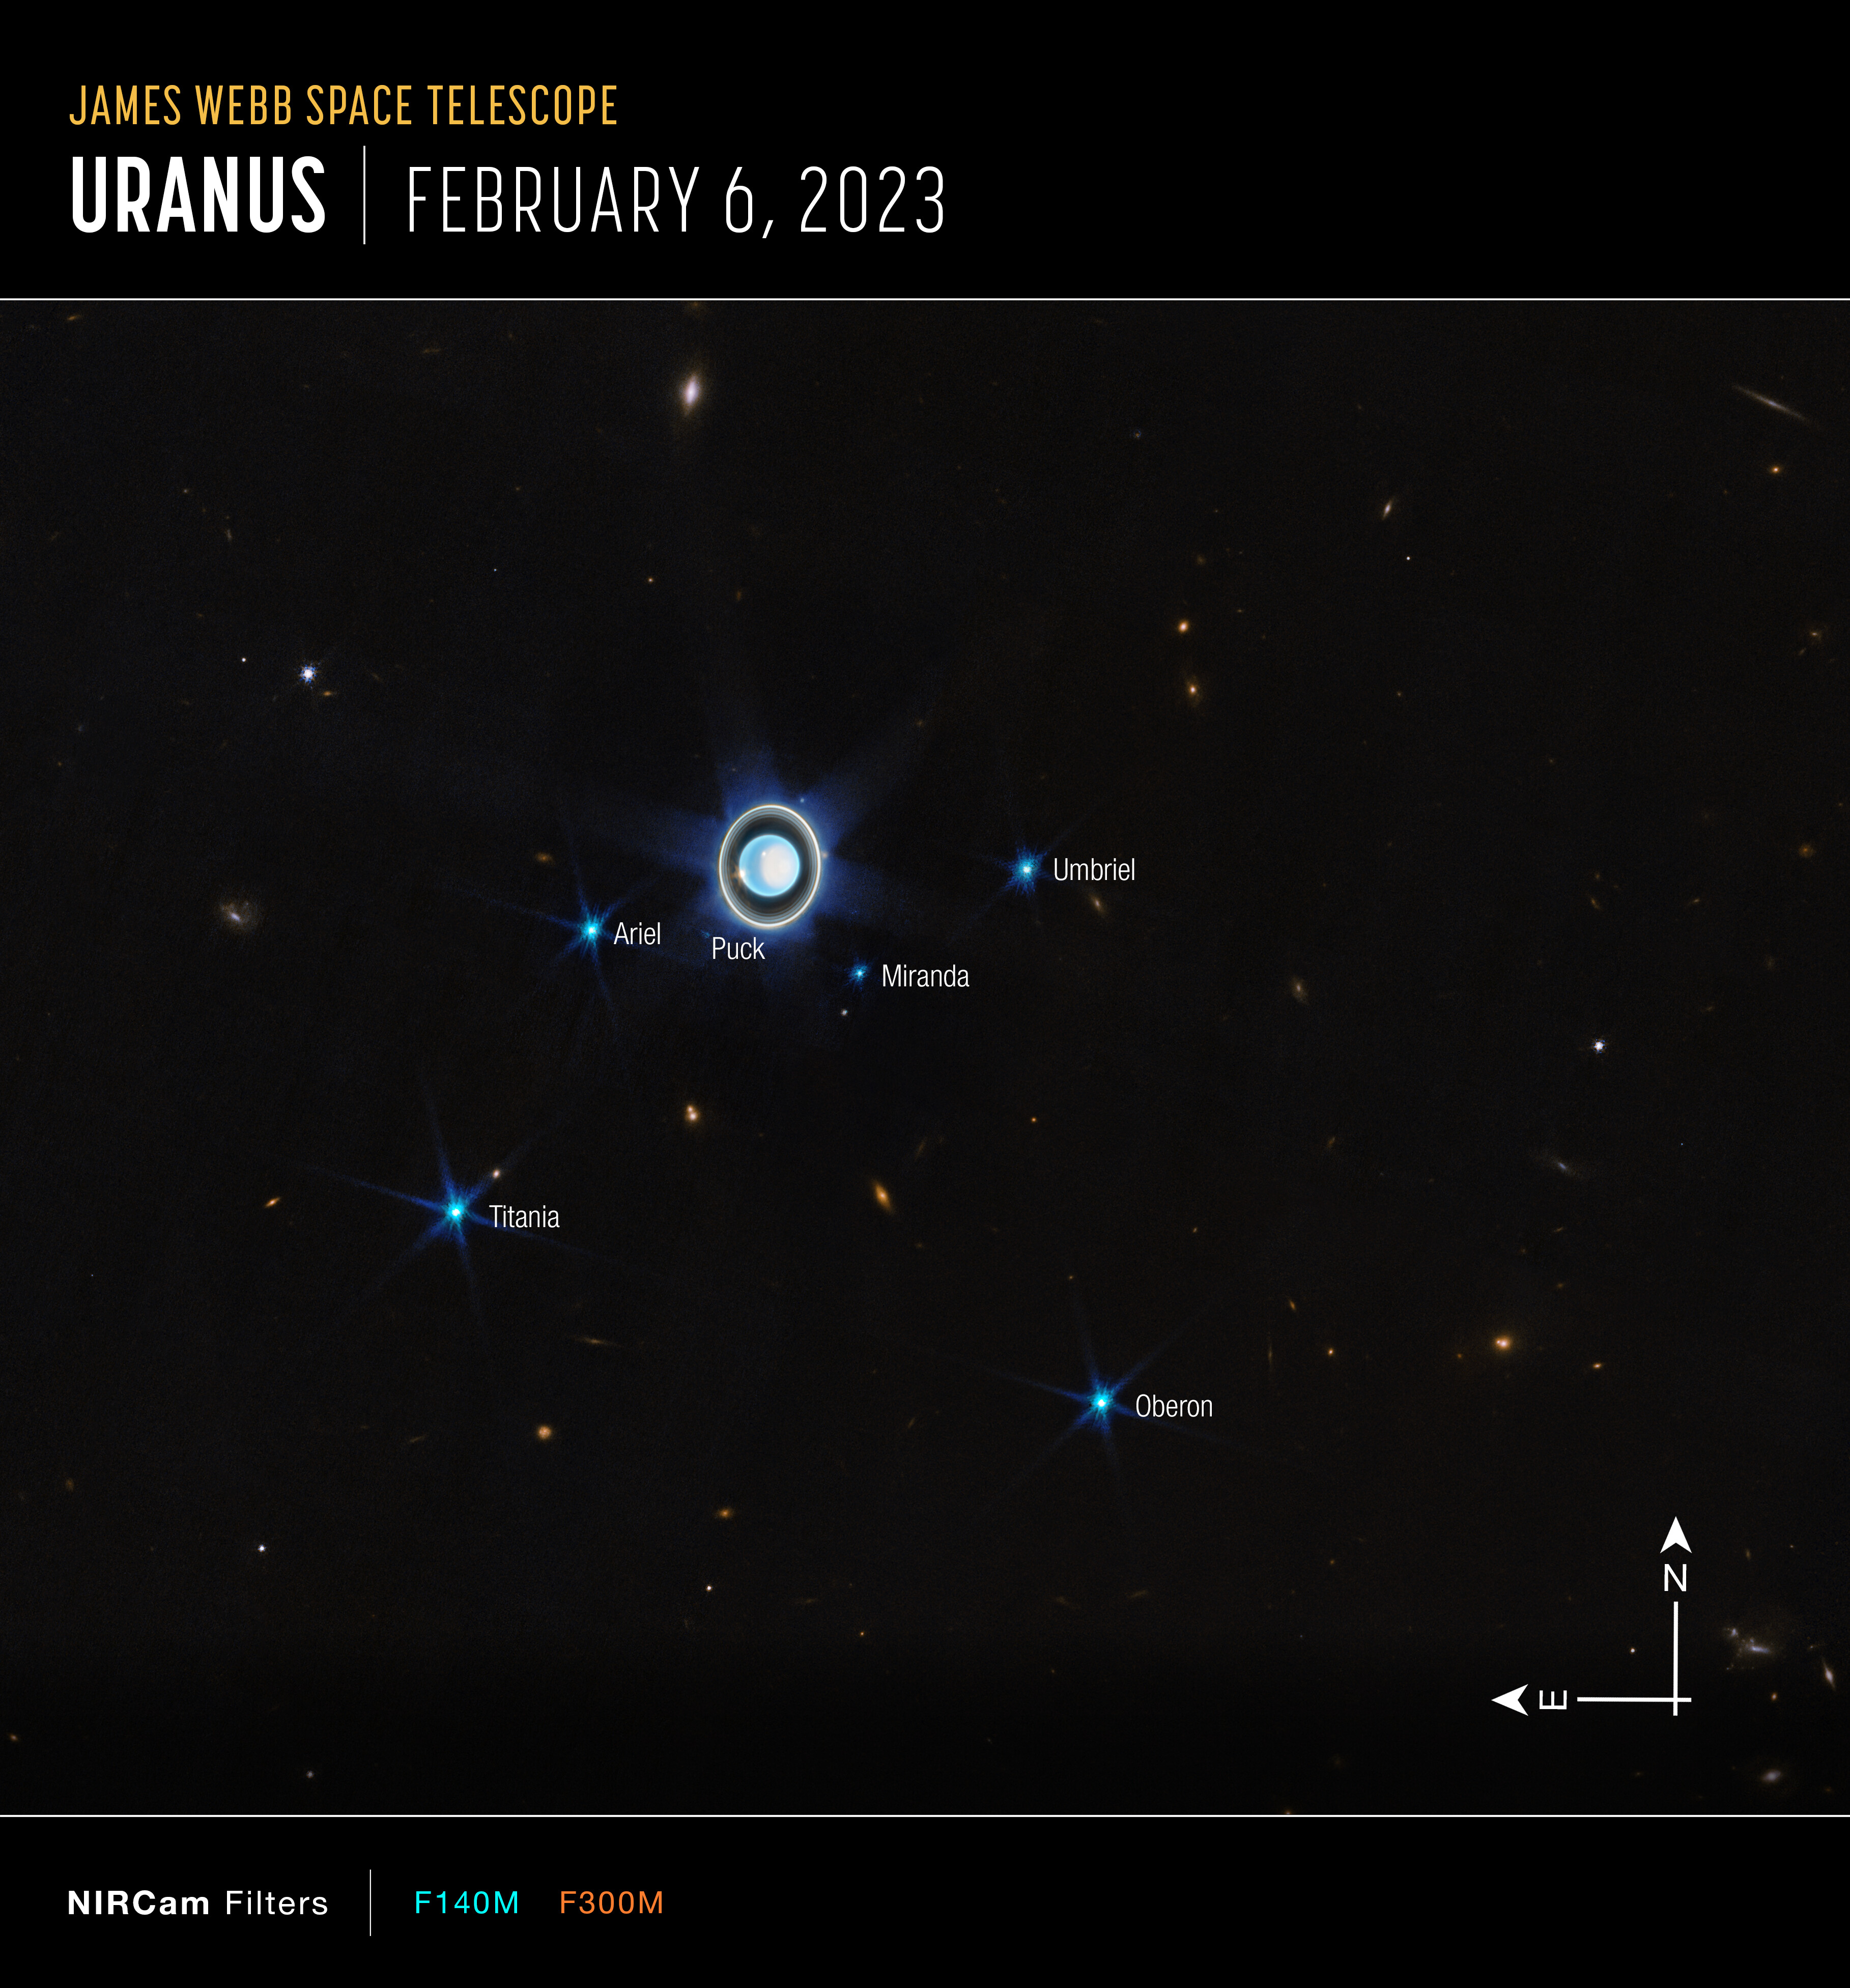 The planet Uranus is on a black background just left of centre. It is coloured light blue and displays a large, white patch on the right side as well as two bright spots and a surrounding system of nested rings oriented vertically